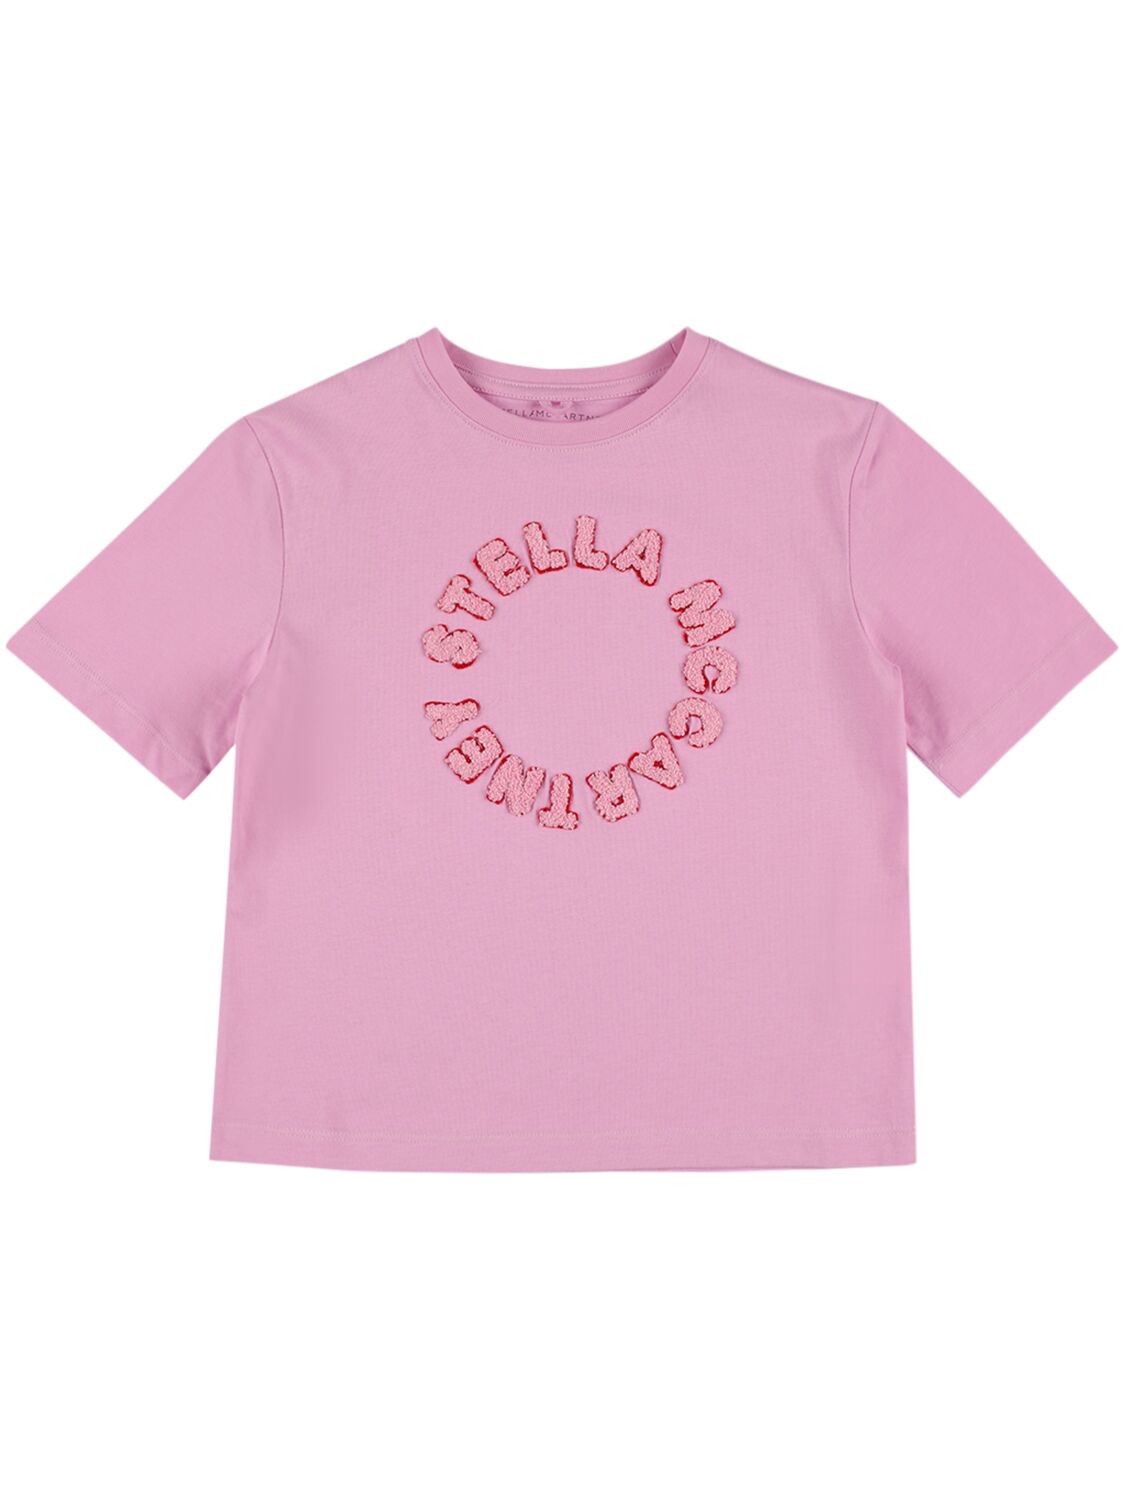 Image of Embroidered Cotton Jersey T-shirt